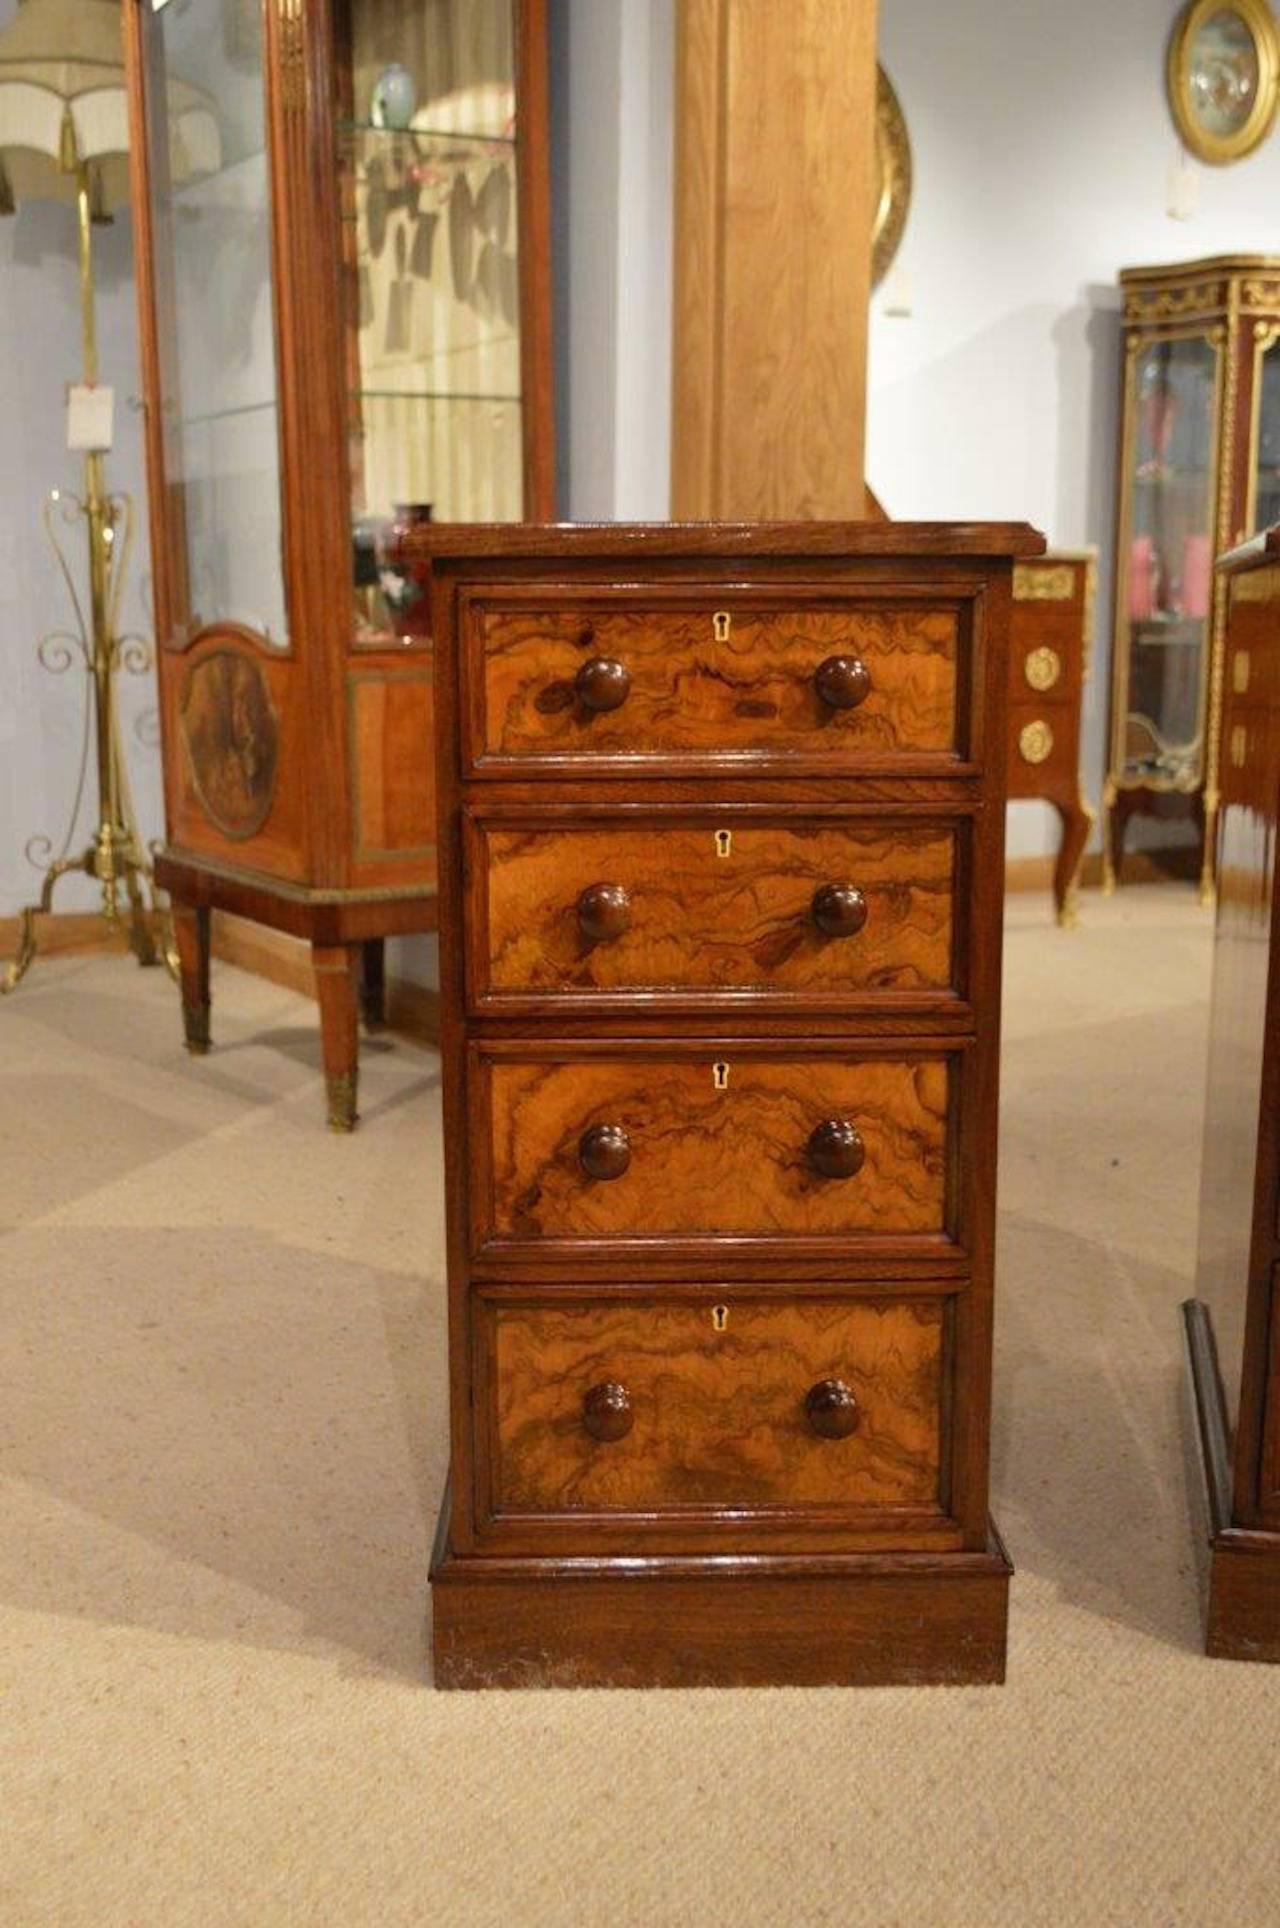 A fine quality pair of burr walnut Victorian period antique bedside chests (adapted). The rectangular tops veneered in beautifully figured burr walnut with a walnut moulded edge, above an arrangement of four graduating mahogany lined drawers. Each